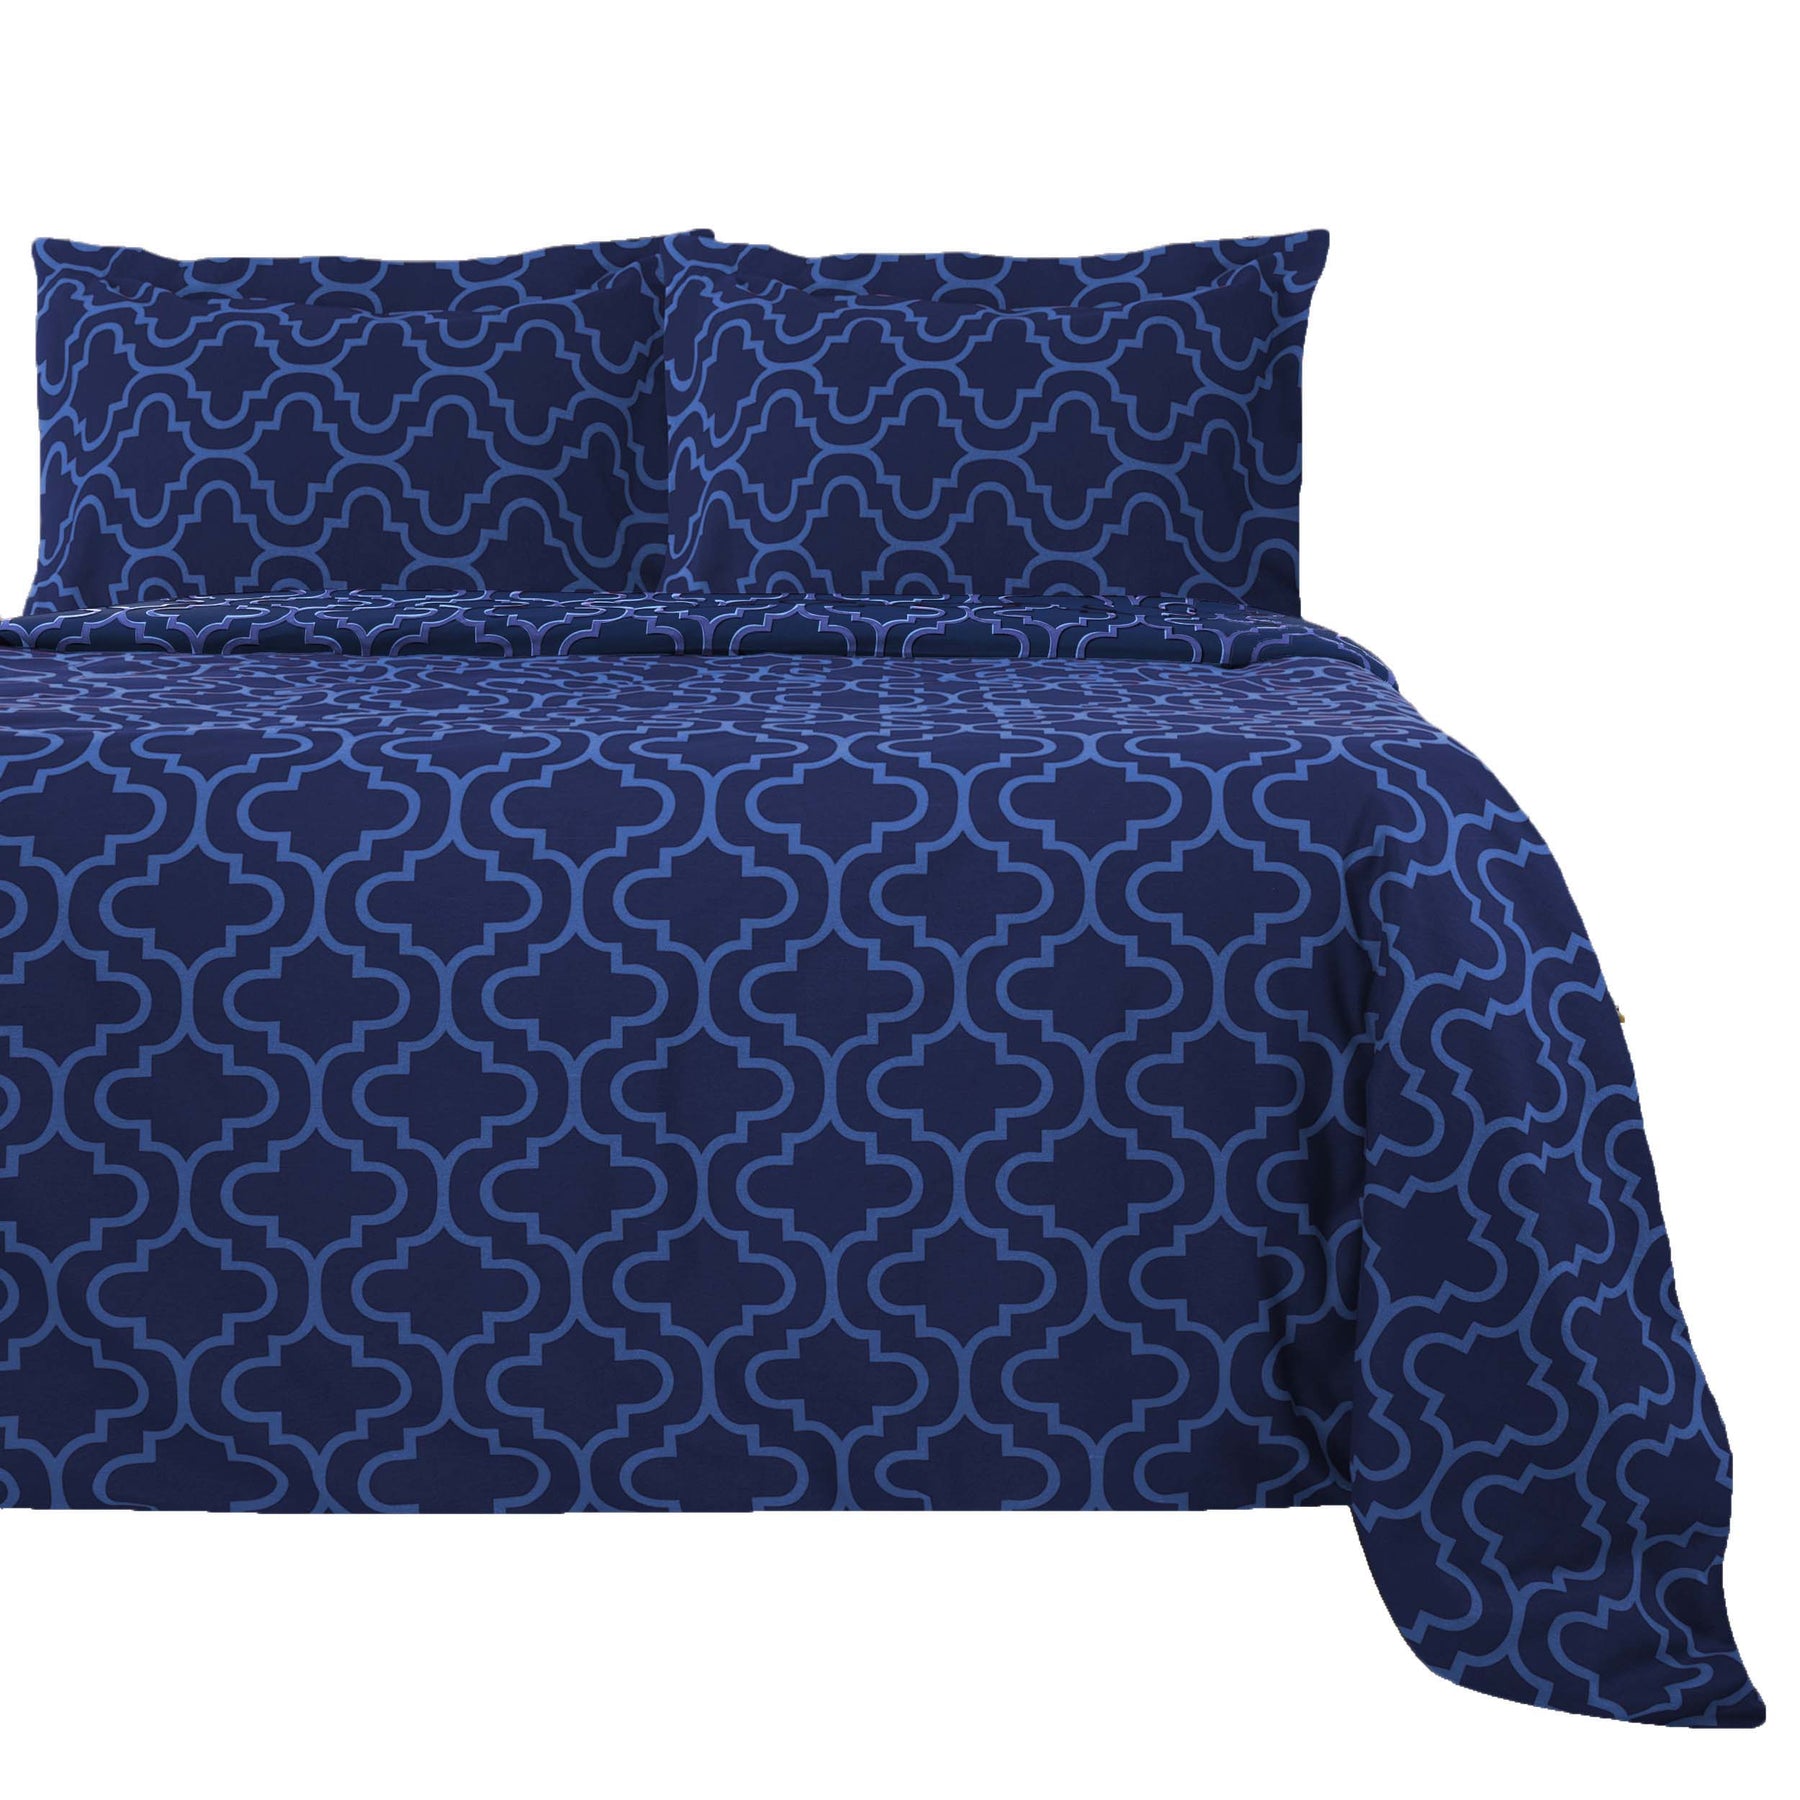 Superior Cotton Flannel Solid or Trellis Heavyweight and Breathable Duvet Cover Set with Button Closure - Navy Blue